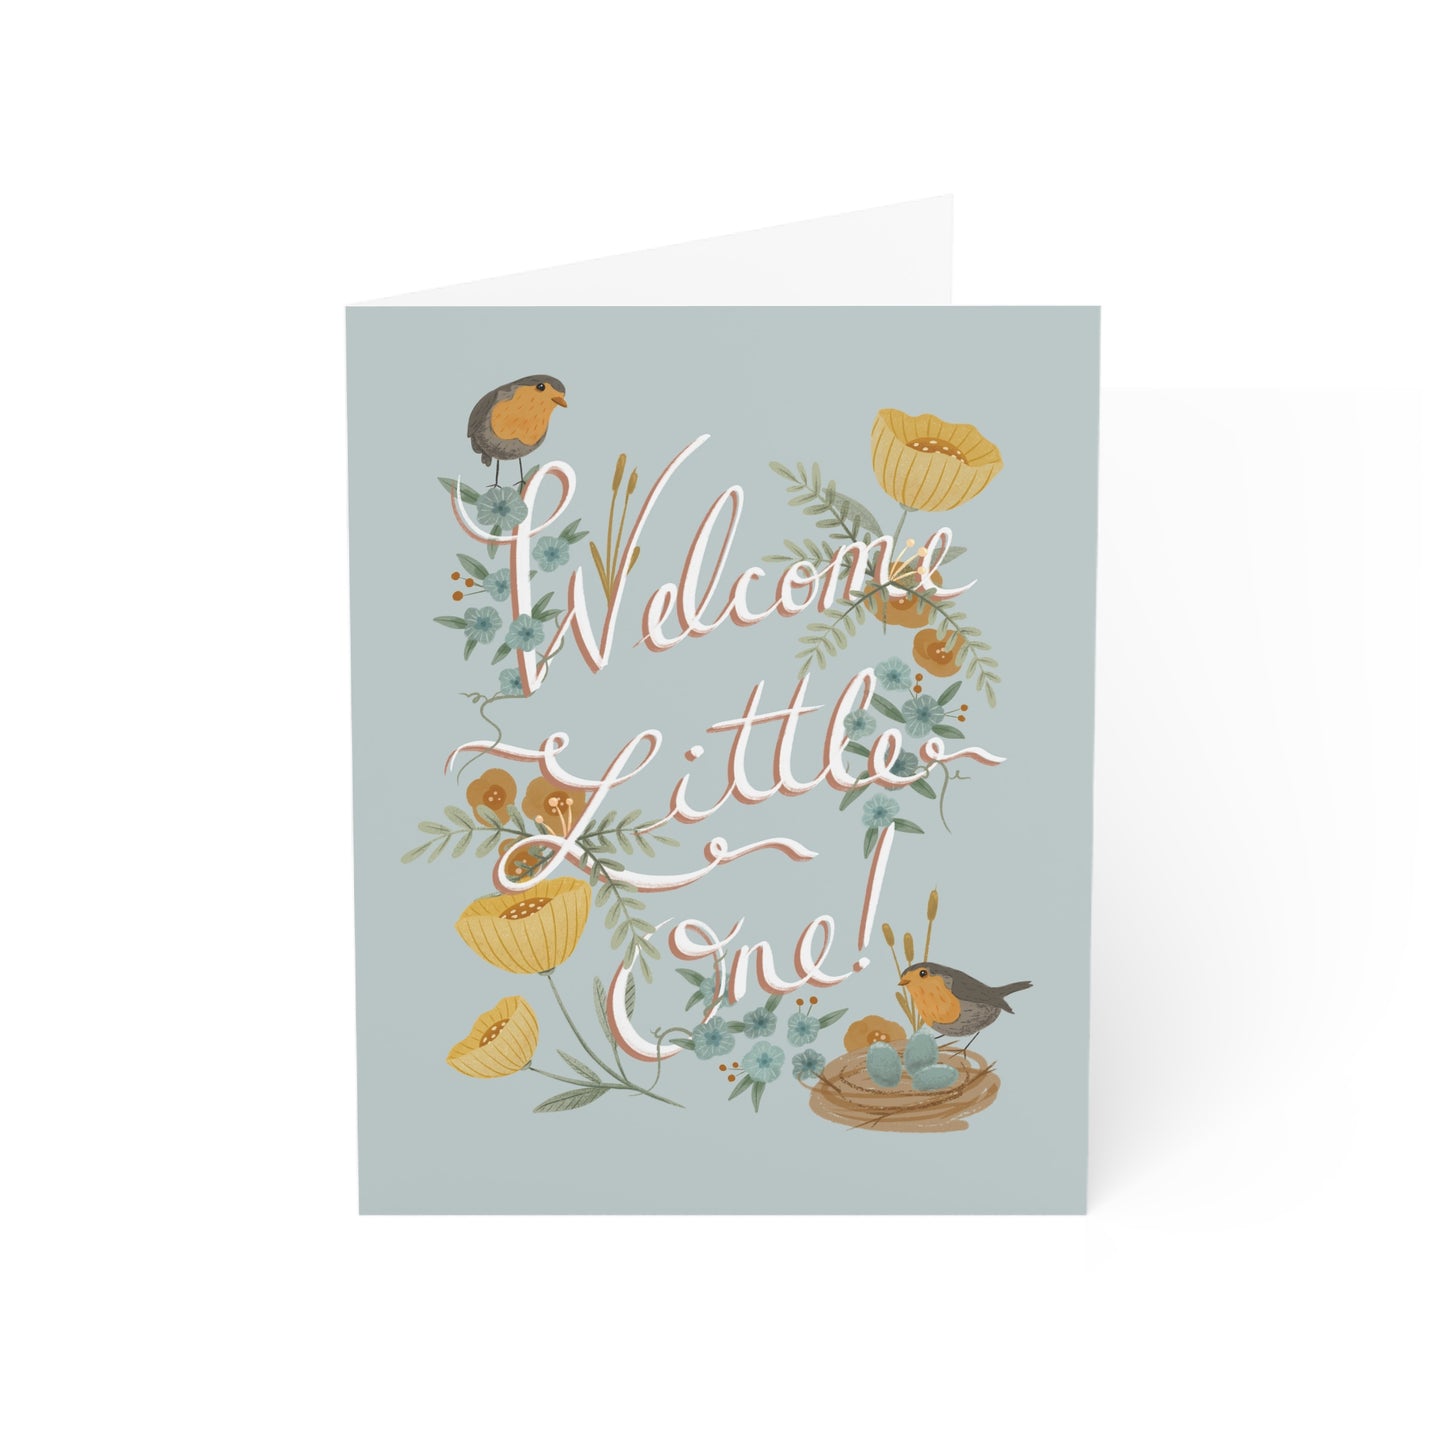 Welcome Little One (Blue) Greeting Cards (1, 10, 30, and 50pcs)